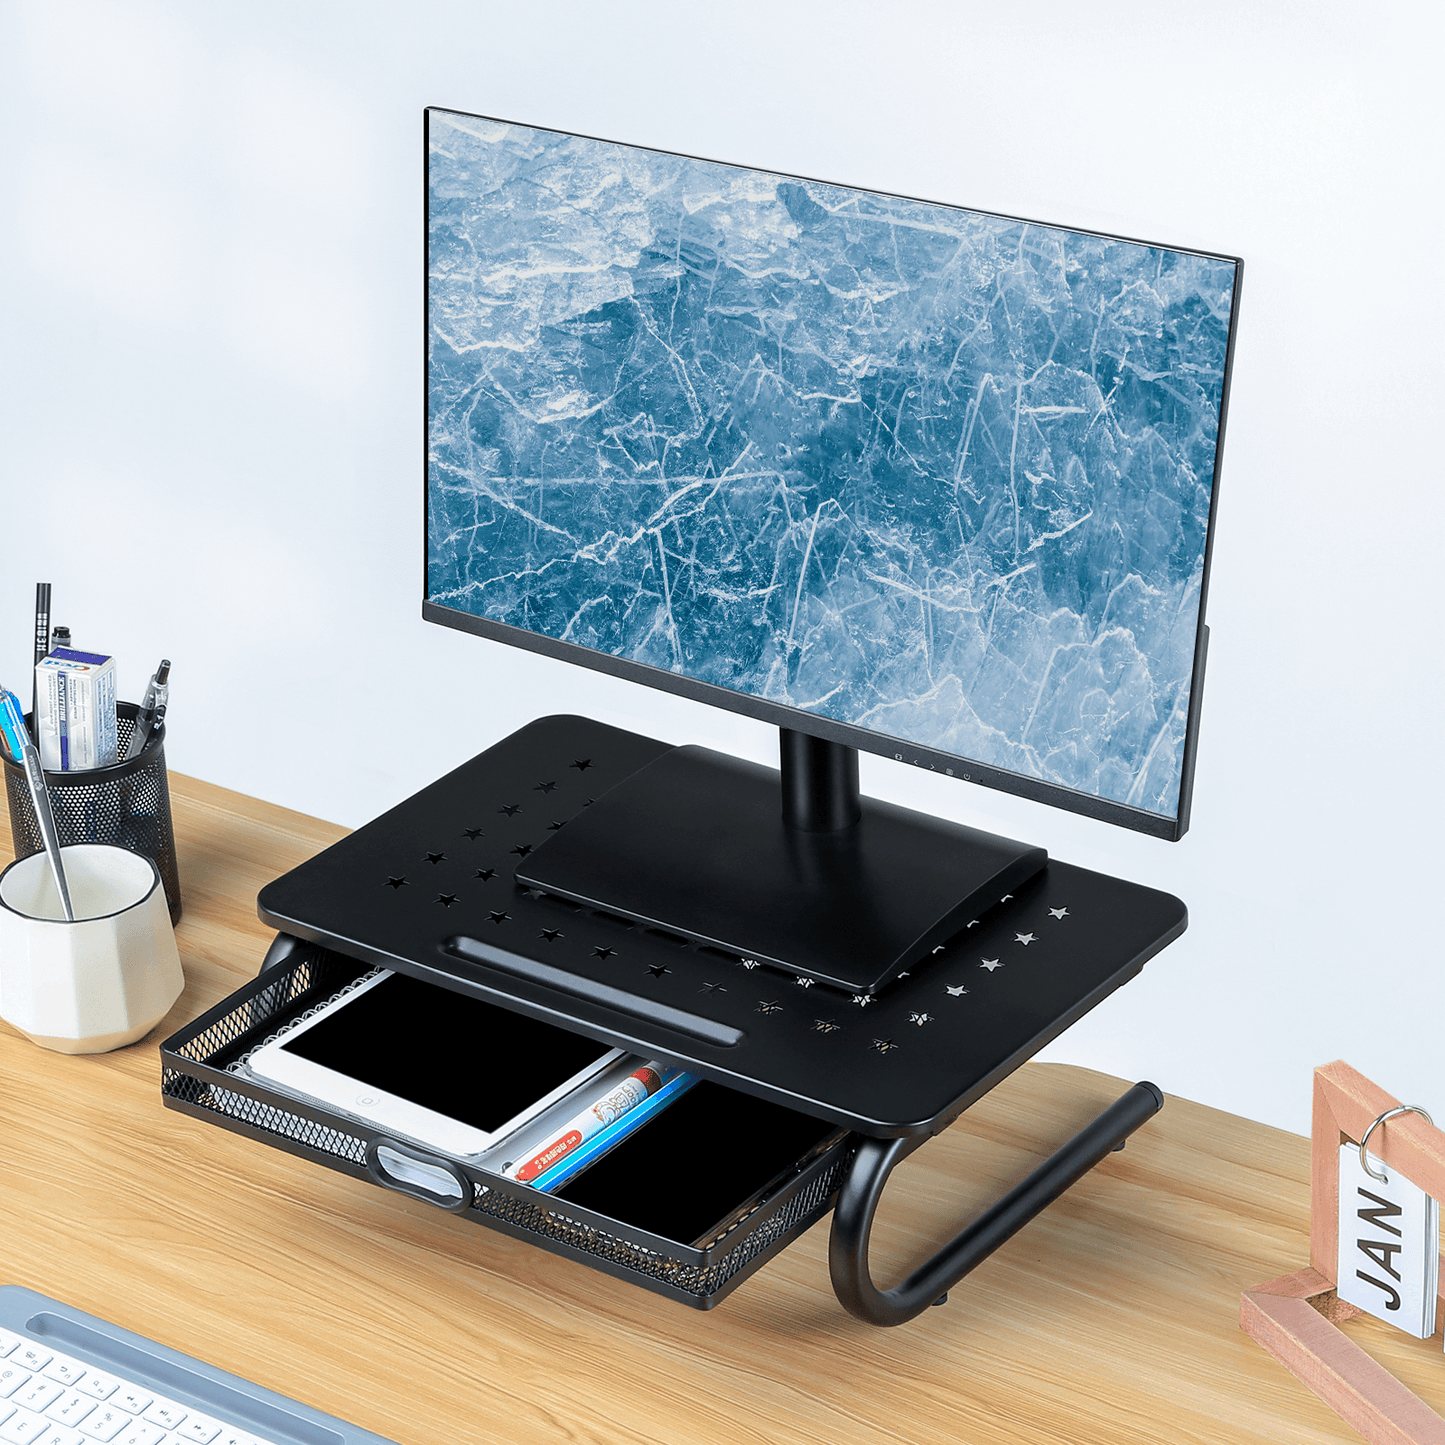 Zimilar U shaped Monitor Stand with Drawer 